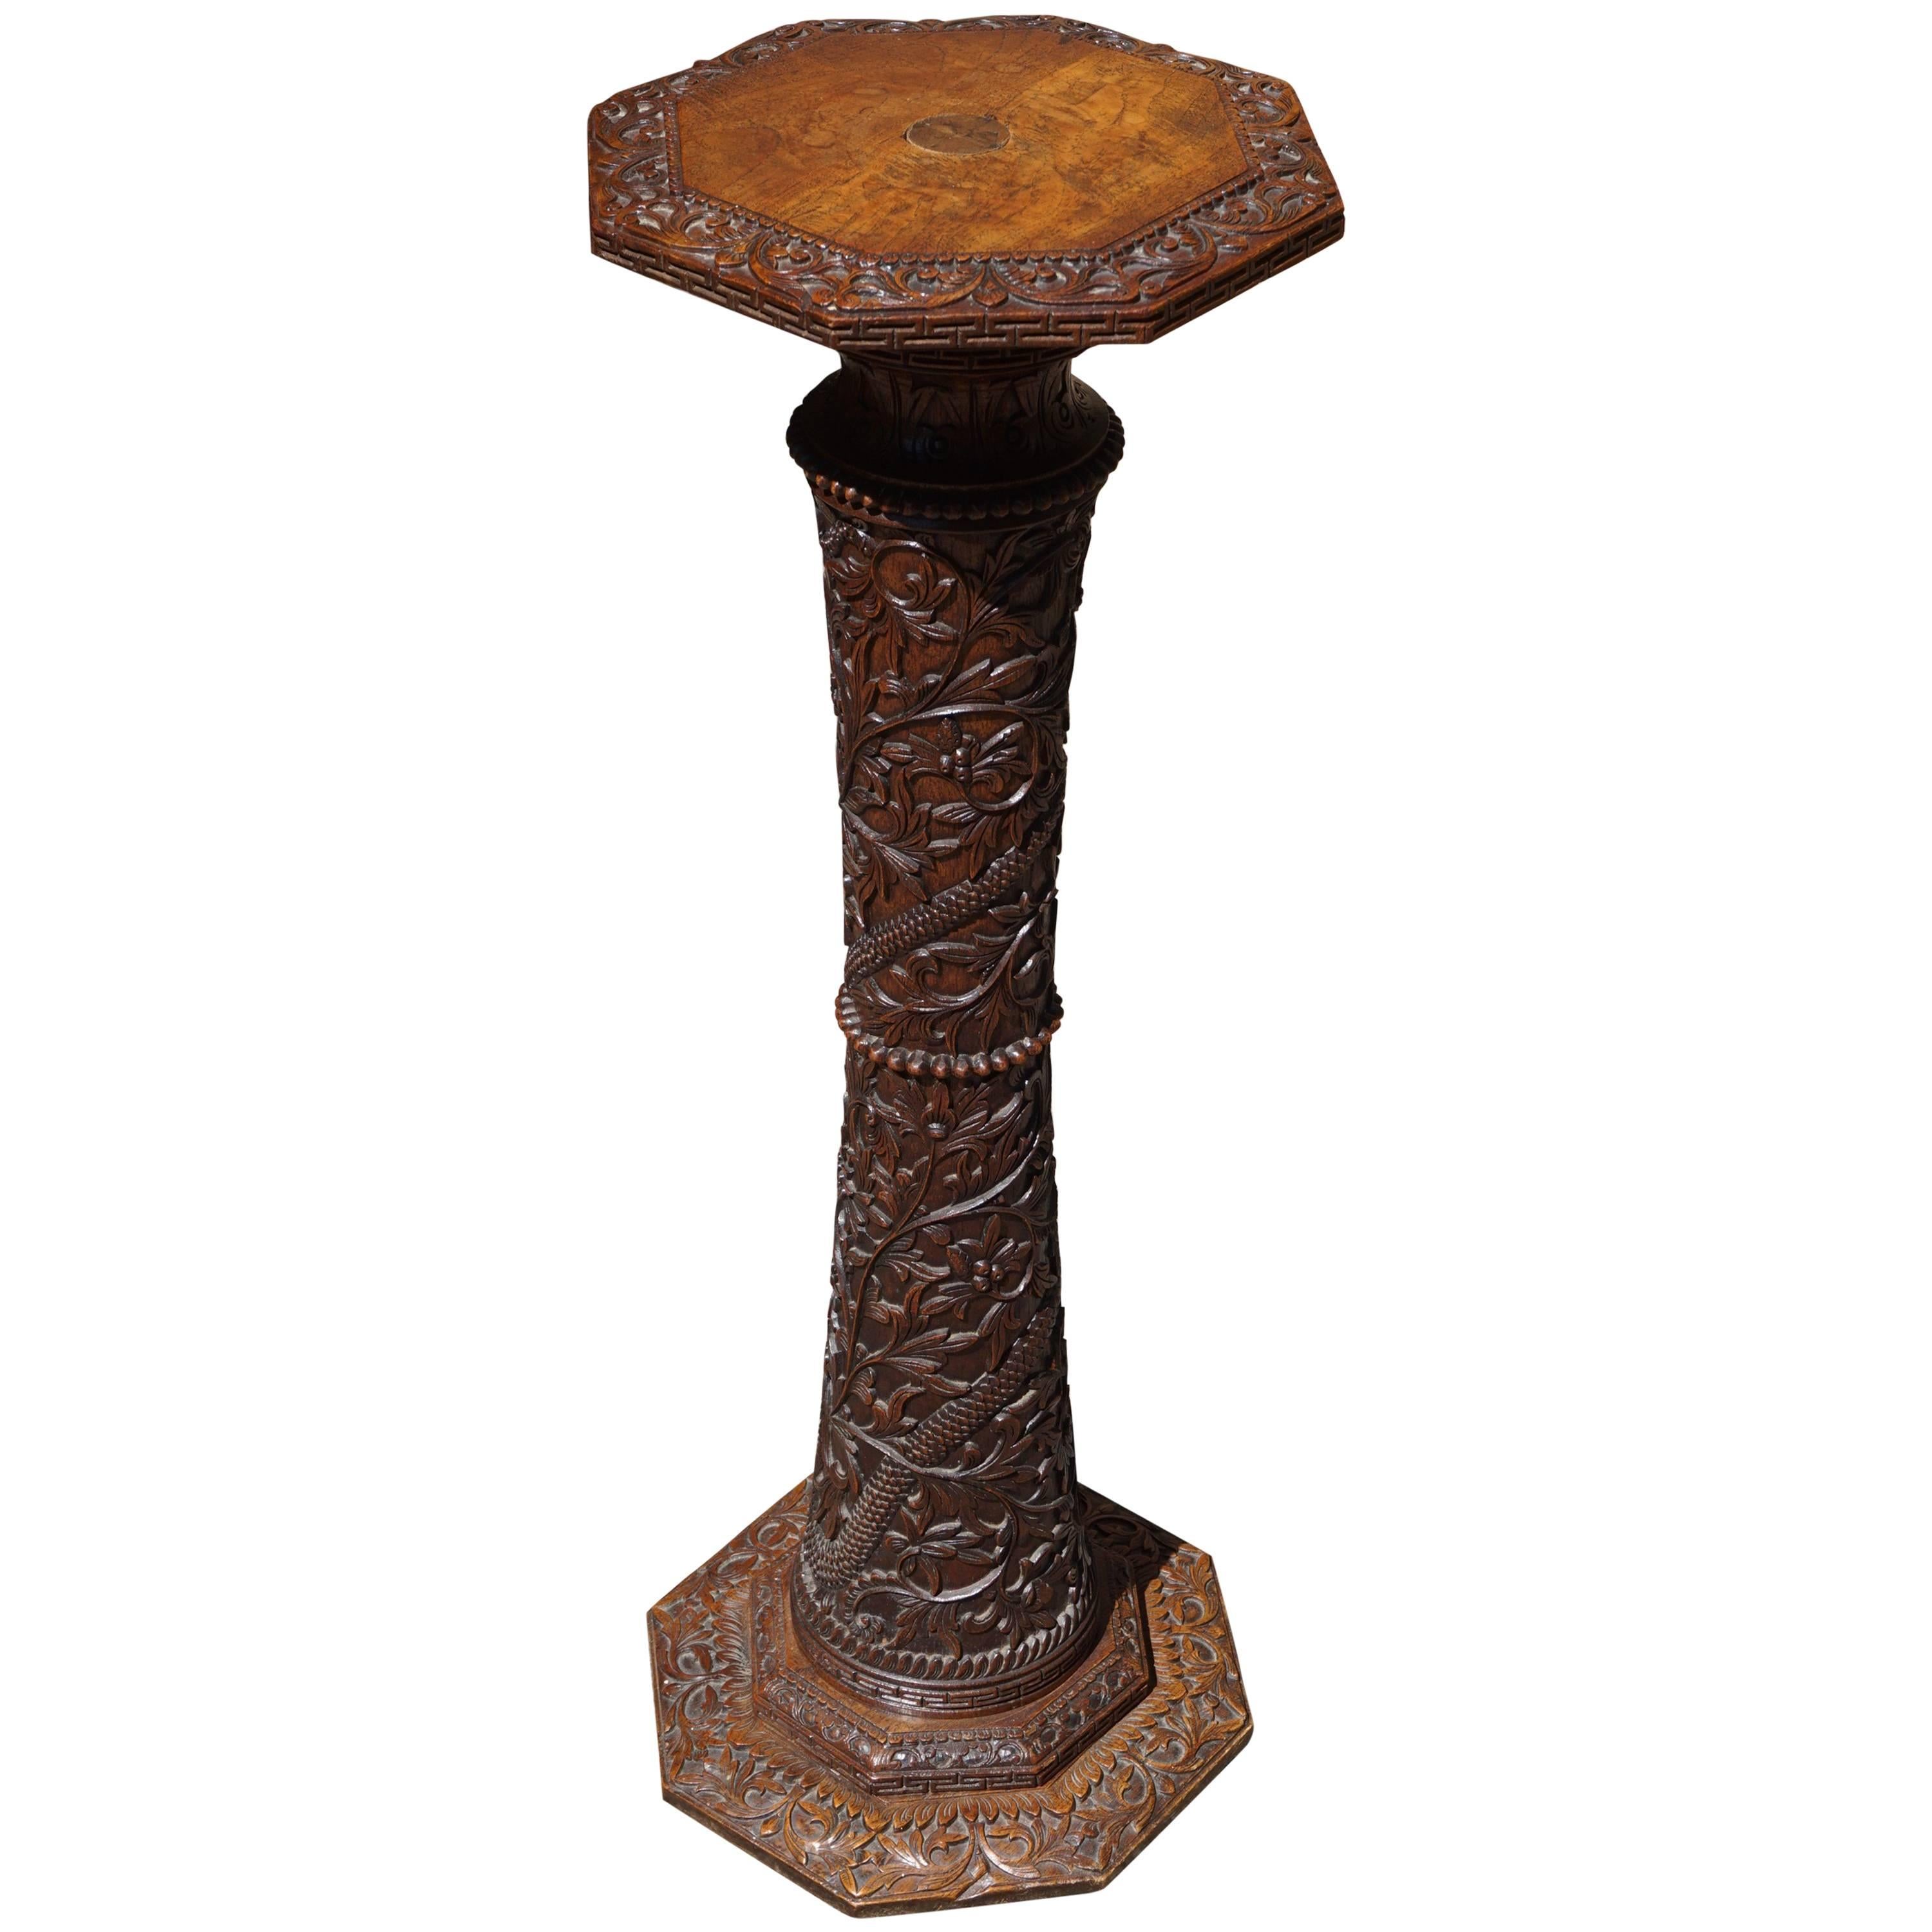 Early 20th Century Hand-Carved Stunning Hardwood Dutch Colonial Pedestal Stand For Sale